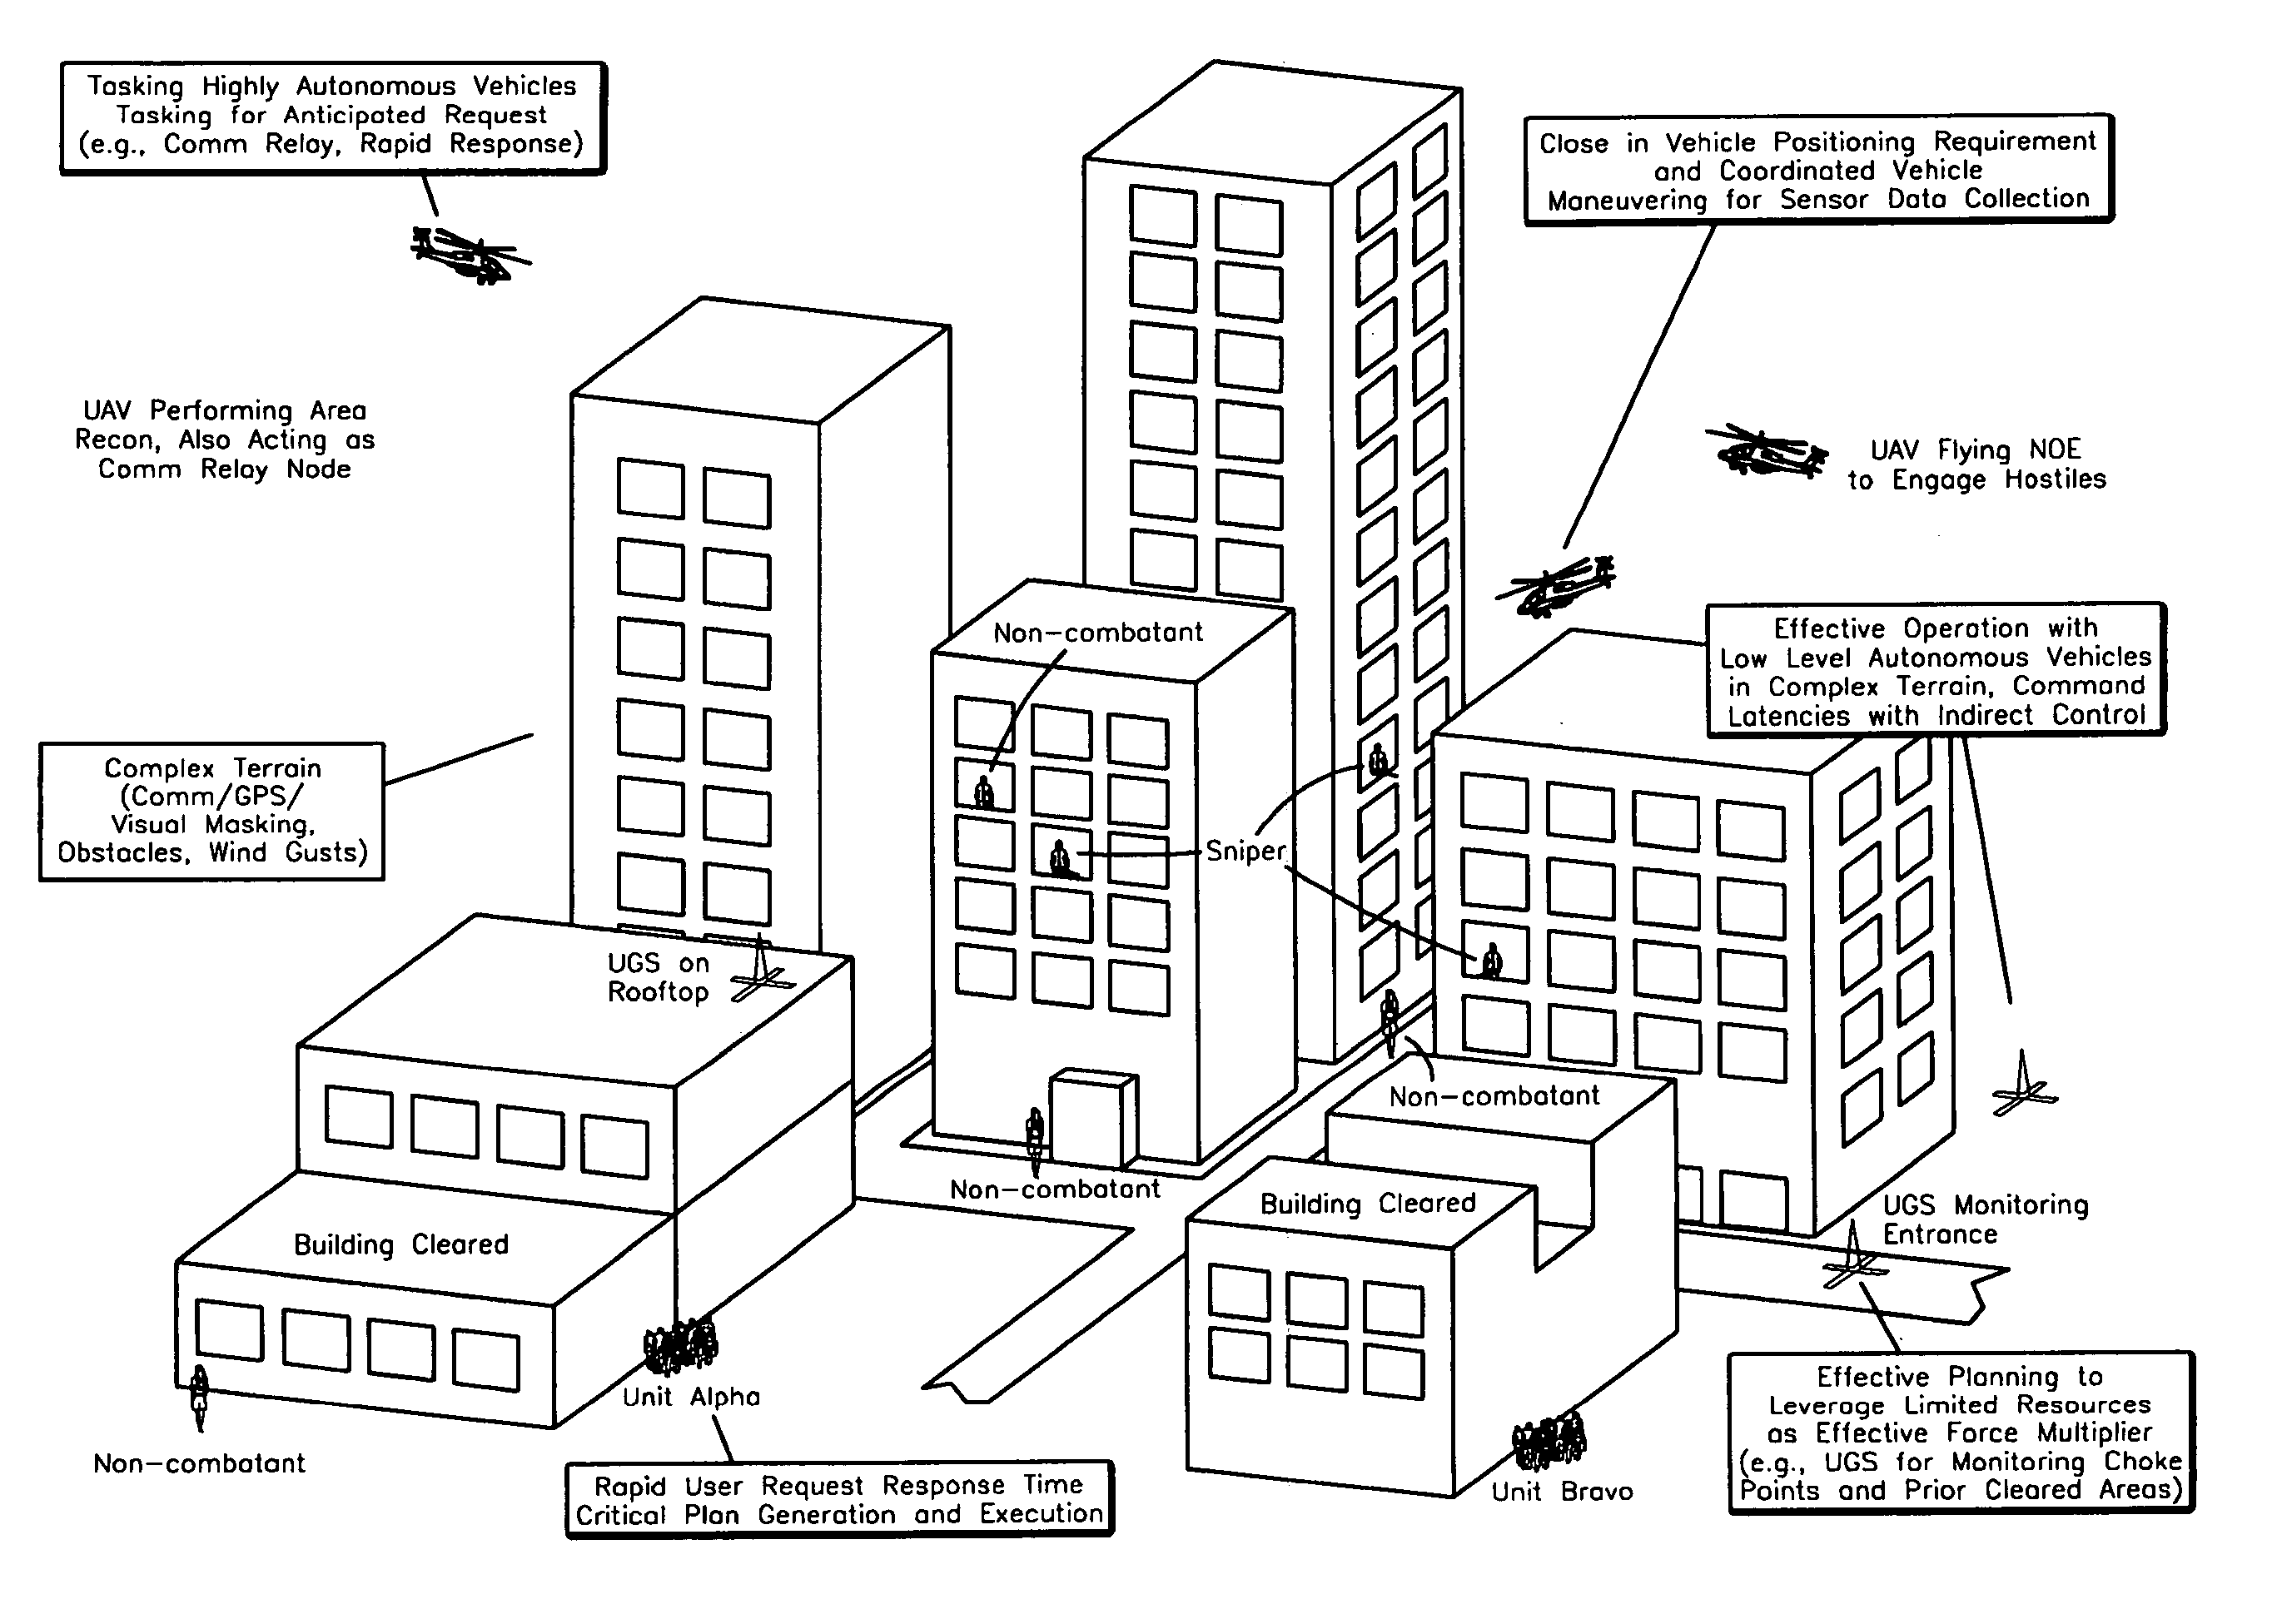 Mission planning system for vehicles with varying levels of autonomy